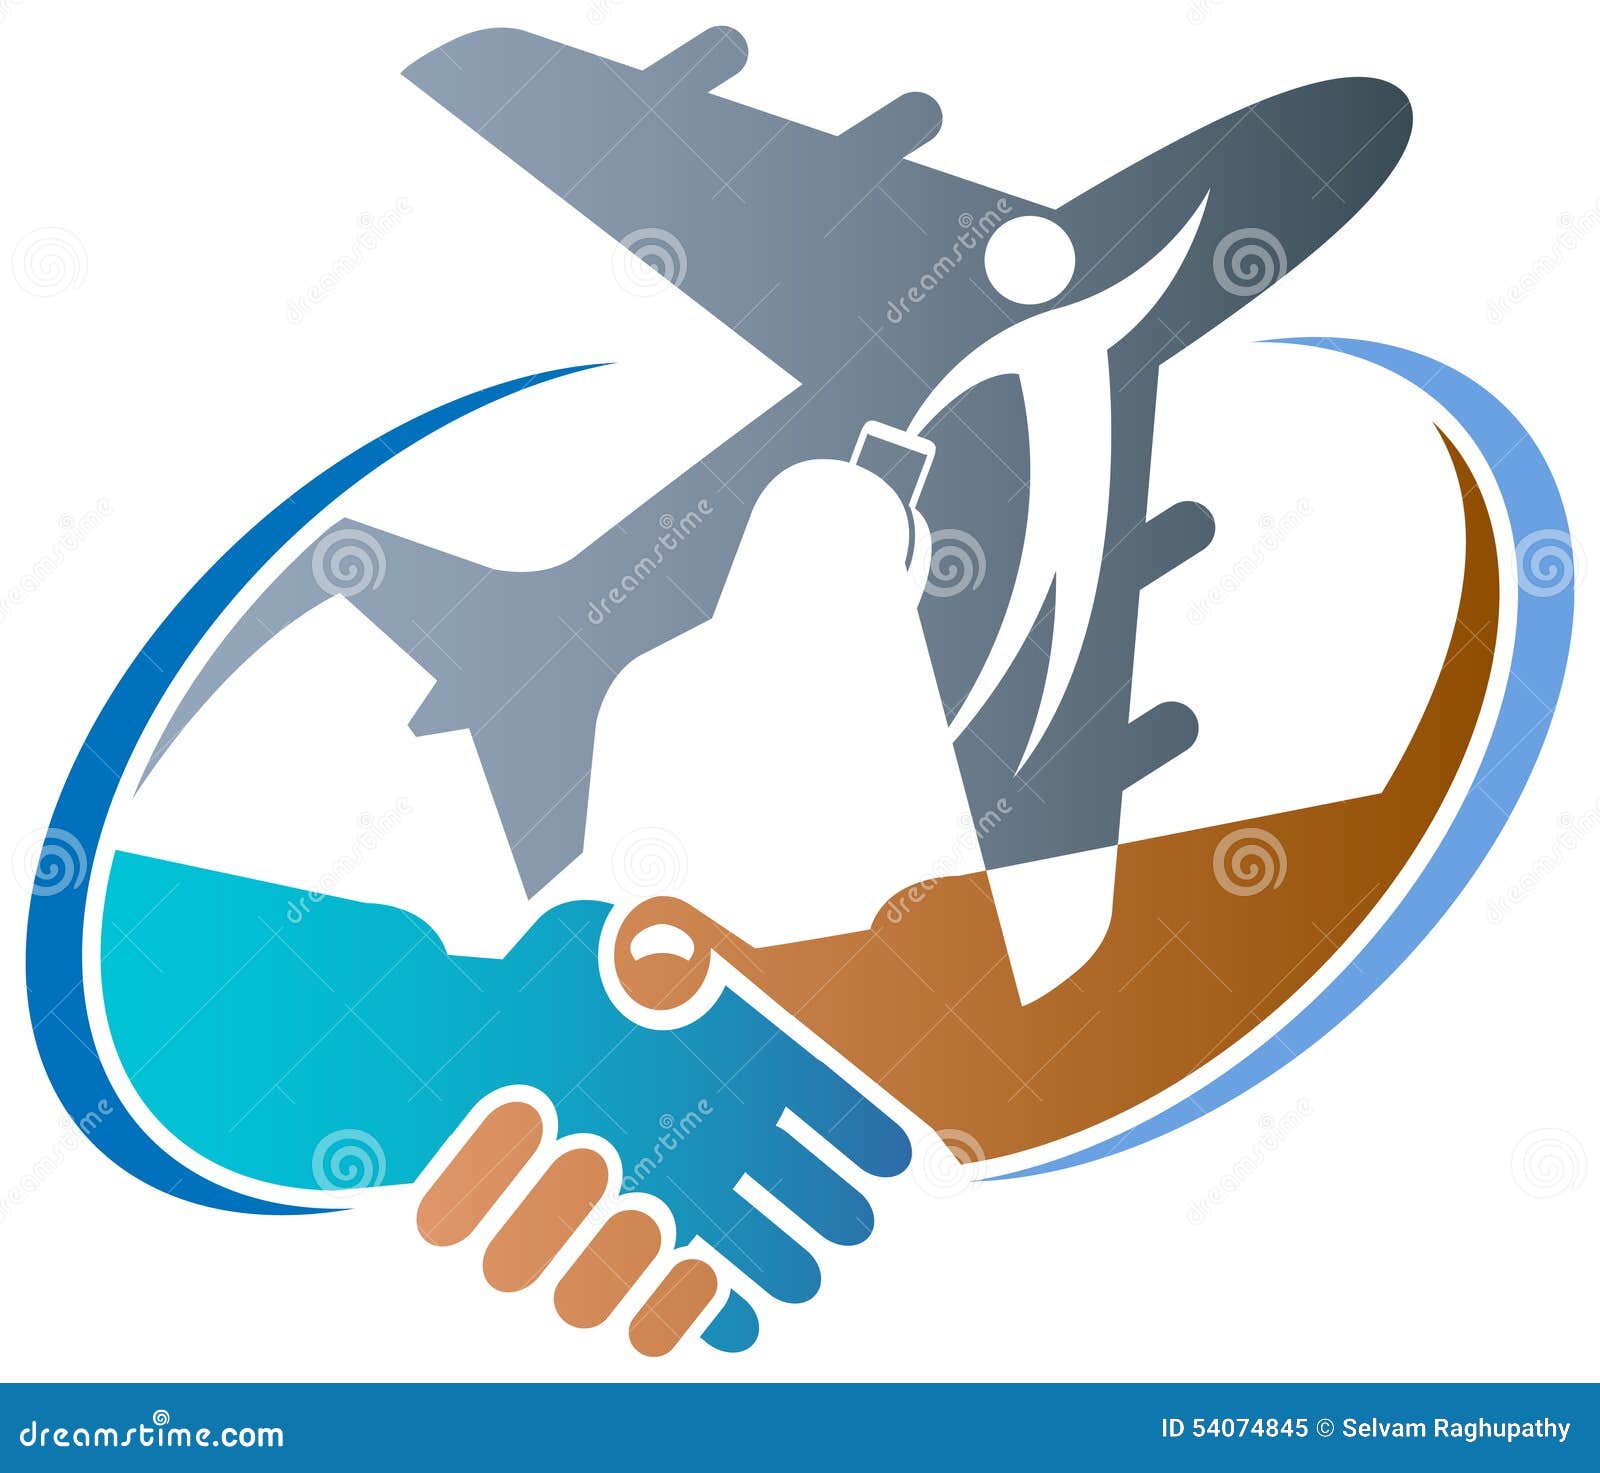 Travel Agency Stock Vector Illustration Of Contact Emblem 54074845